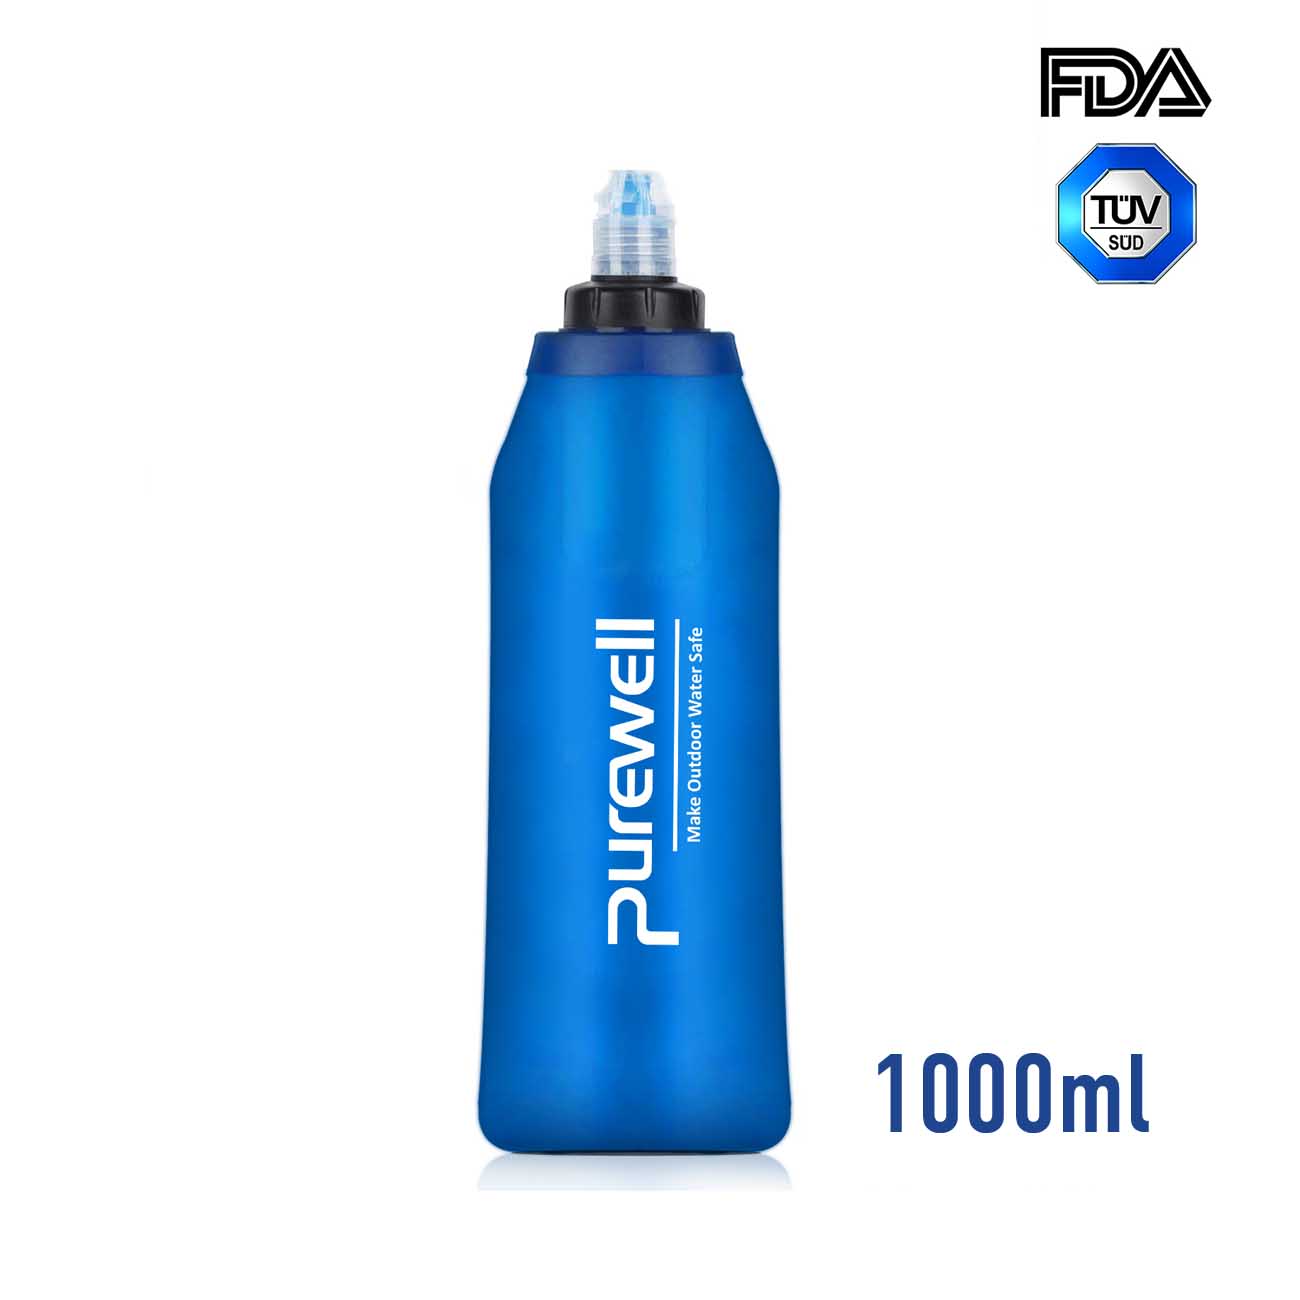 Purewell Outdoor Collapsible Soft Flask 1000ml with Filter for Running, Travel, Backpacking